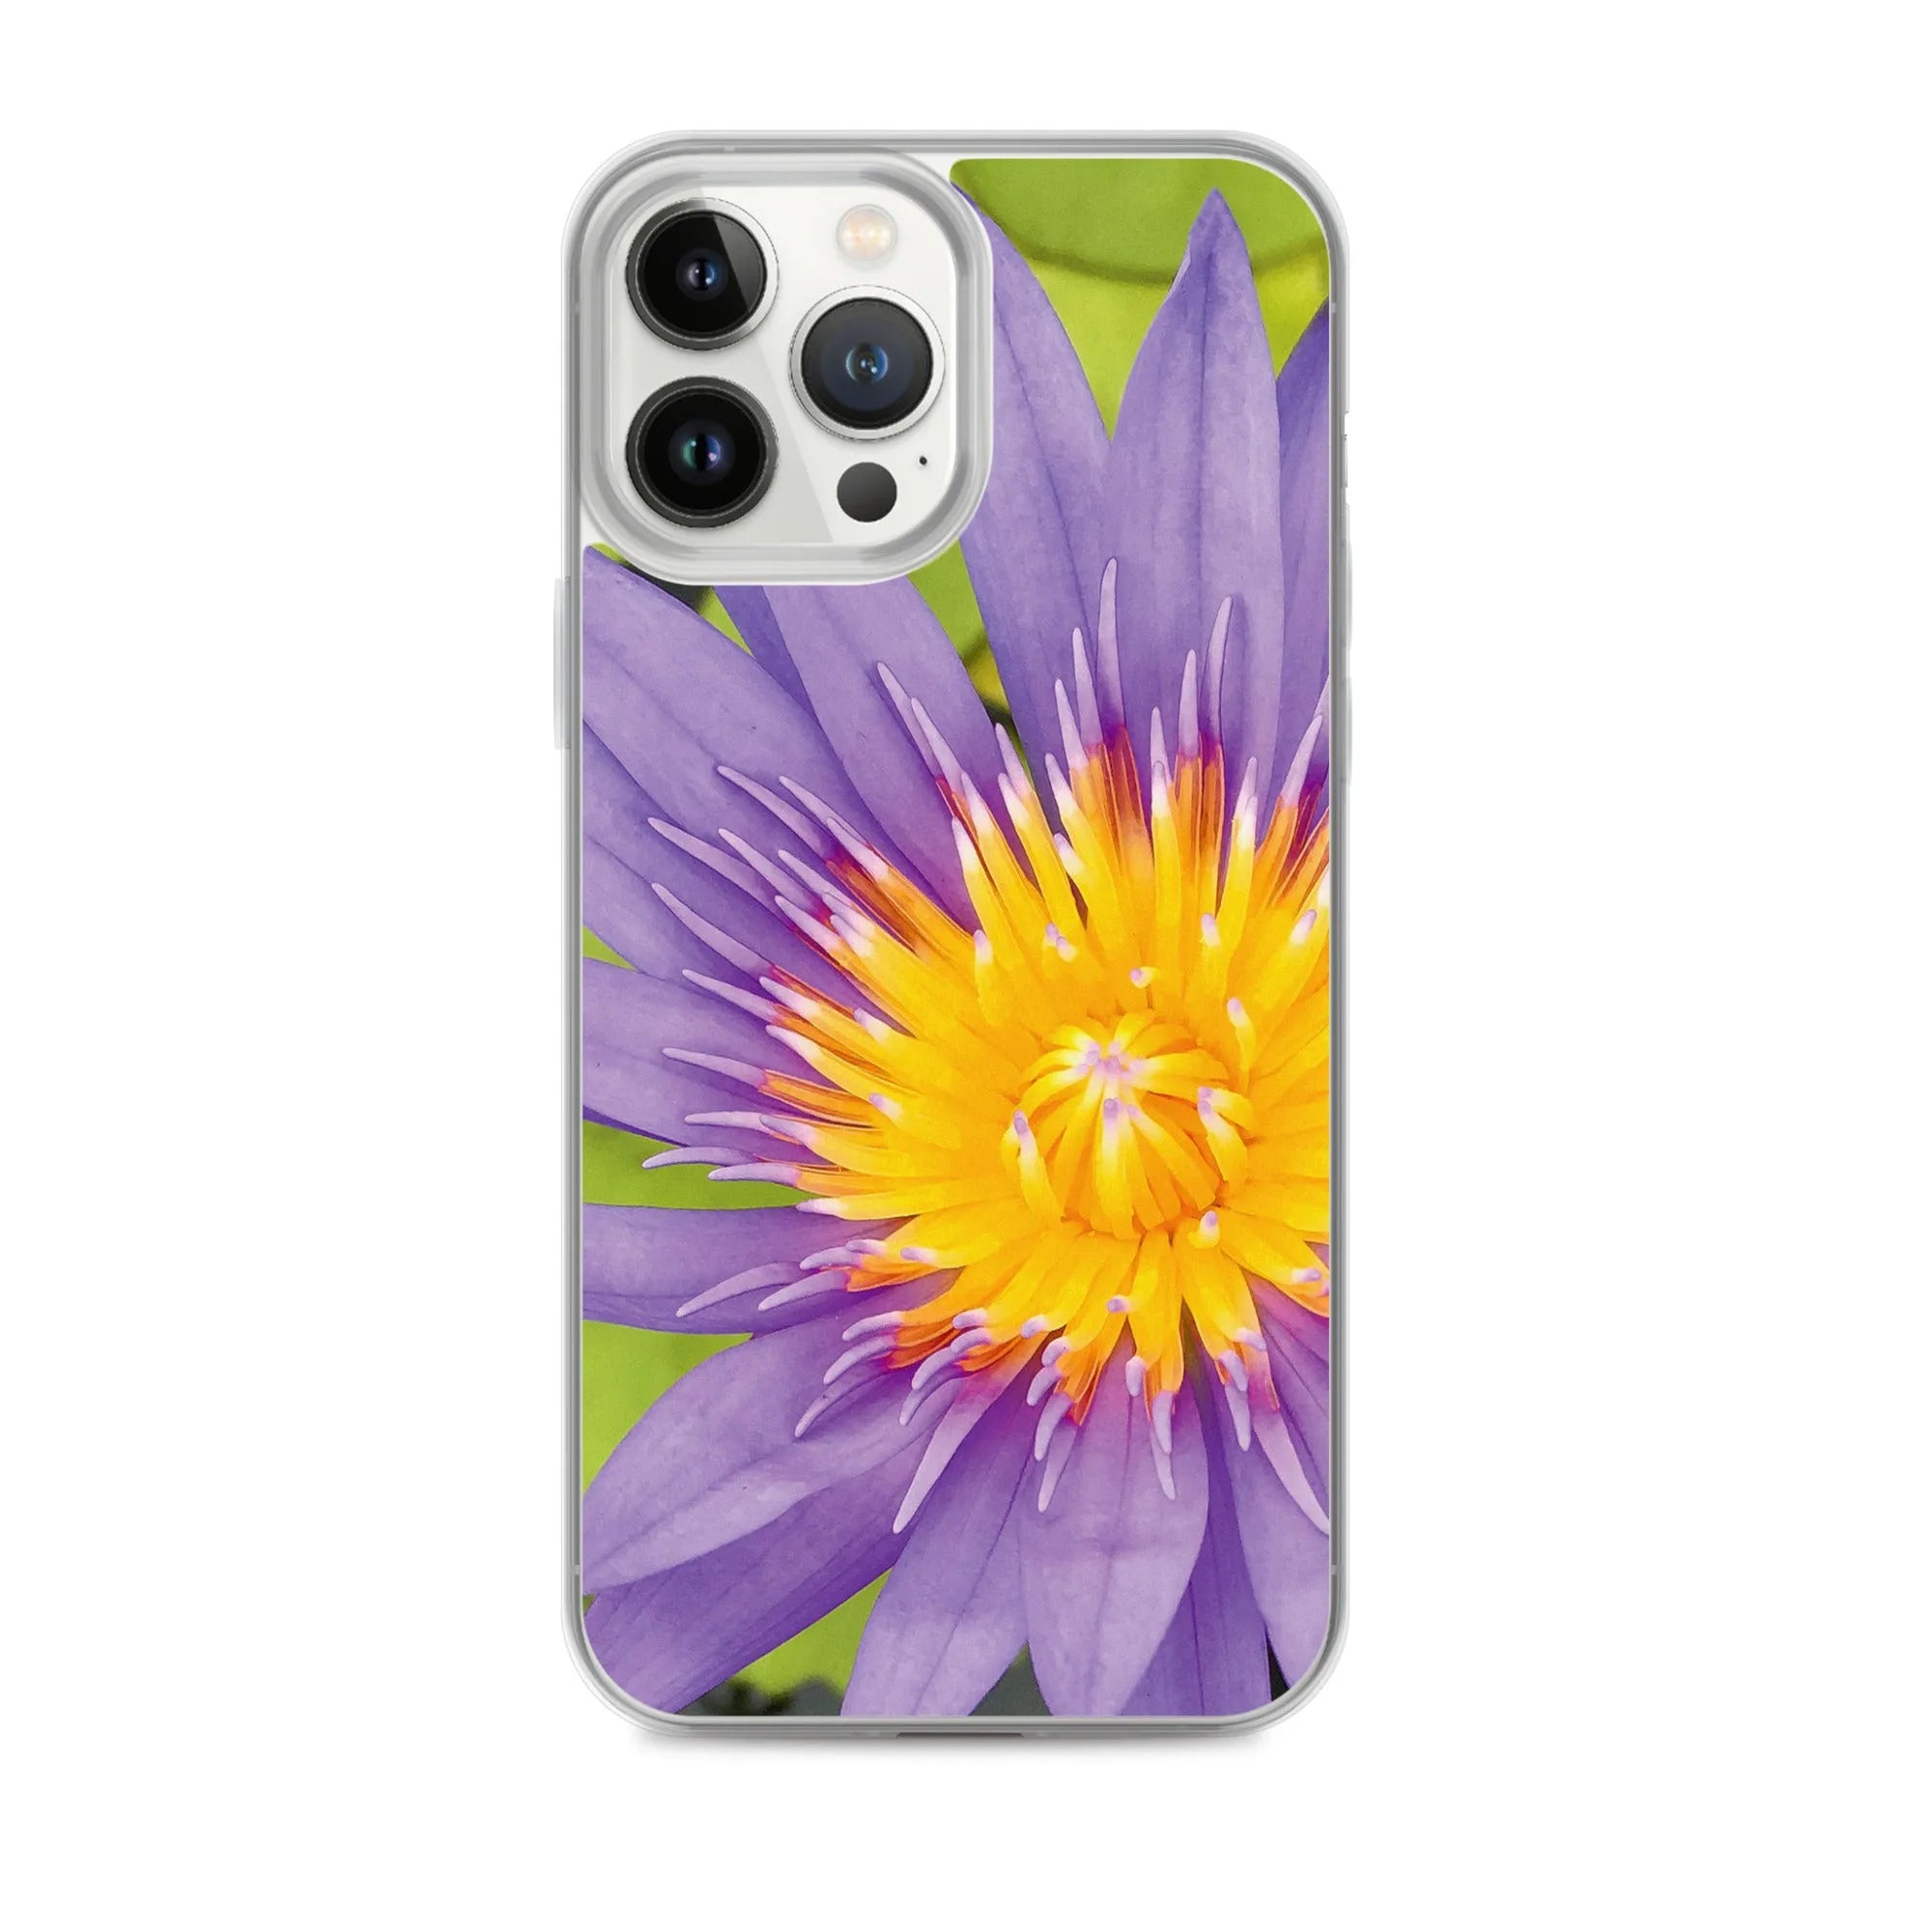 Lilliput Floral Iphone Case - Iphone 13 Pro Max - Mobile Phone Cases - Aesthetic Art